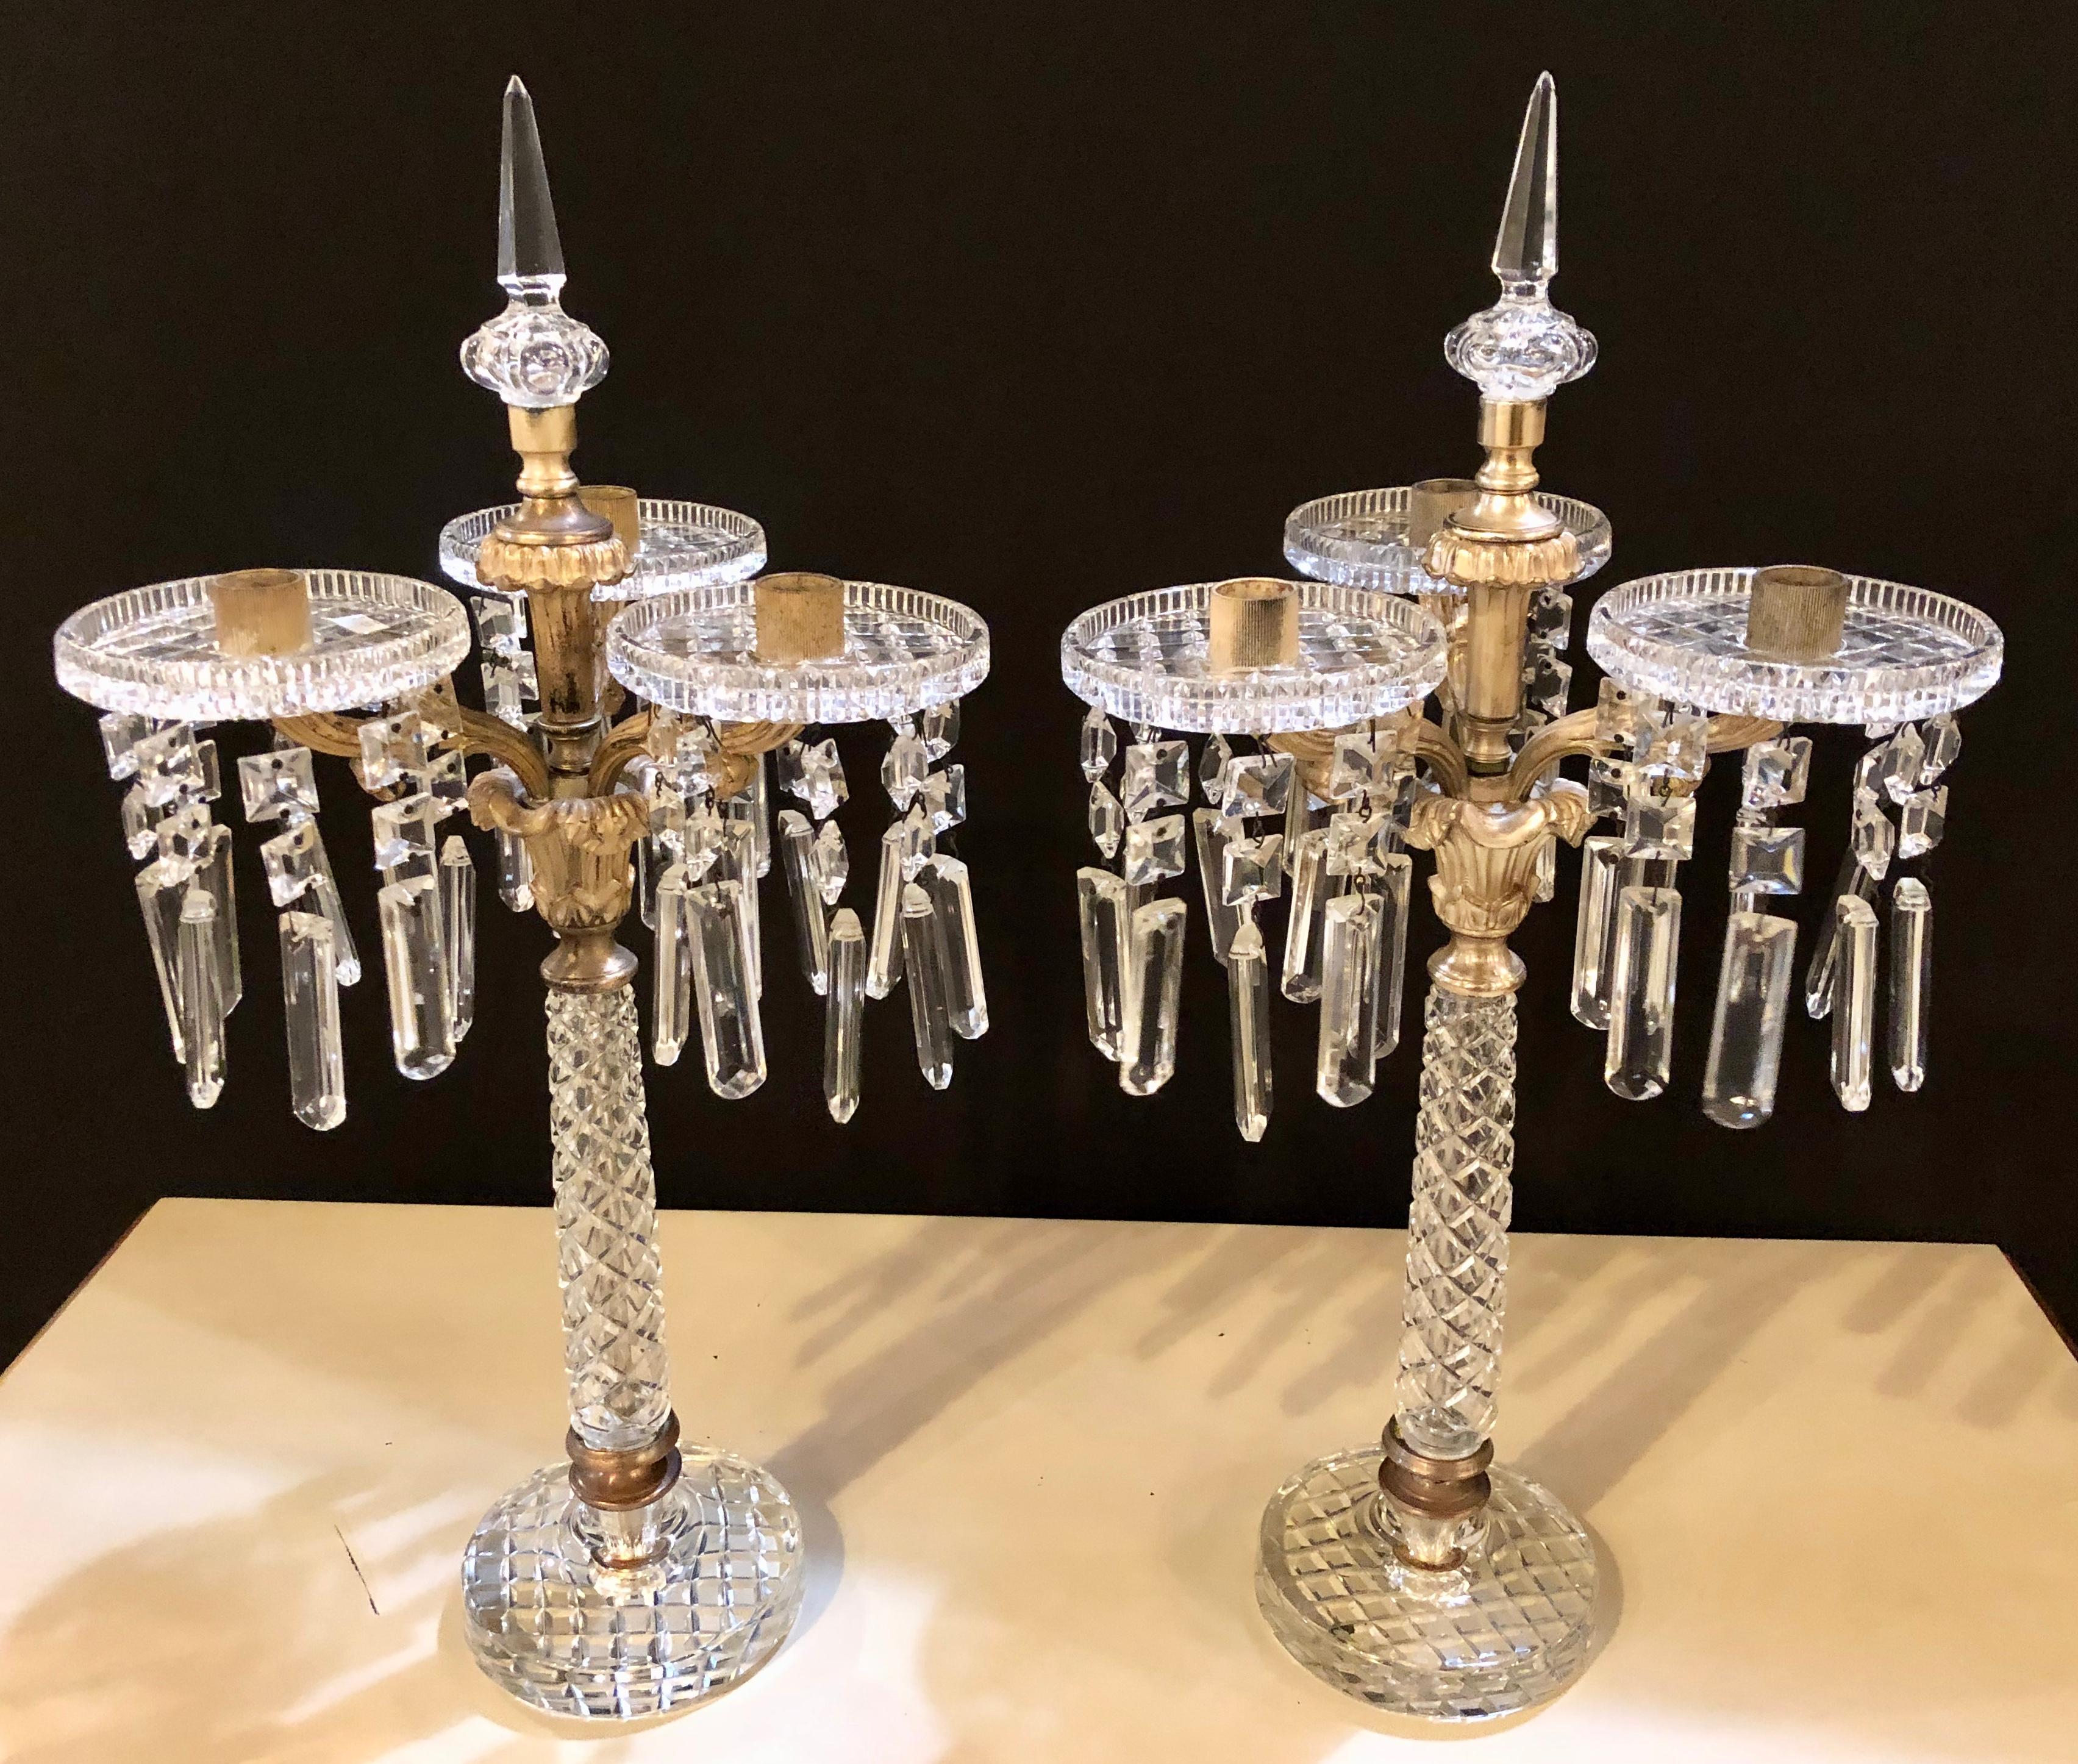 Pair of Baccarat style crystal three-arm candelabras the pair of fine cut quality.
IEH.